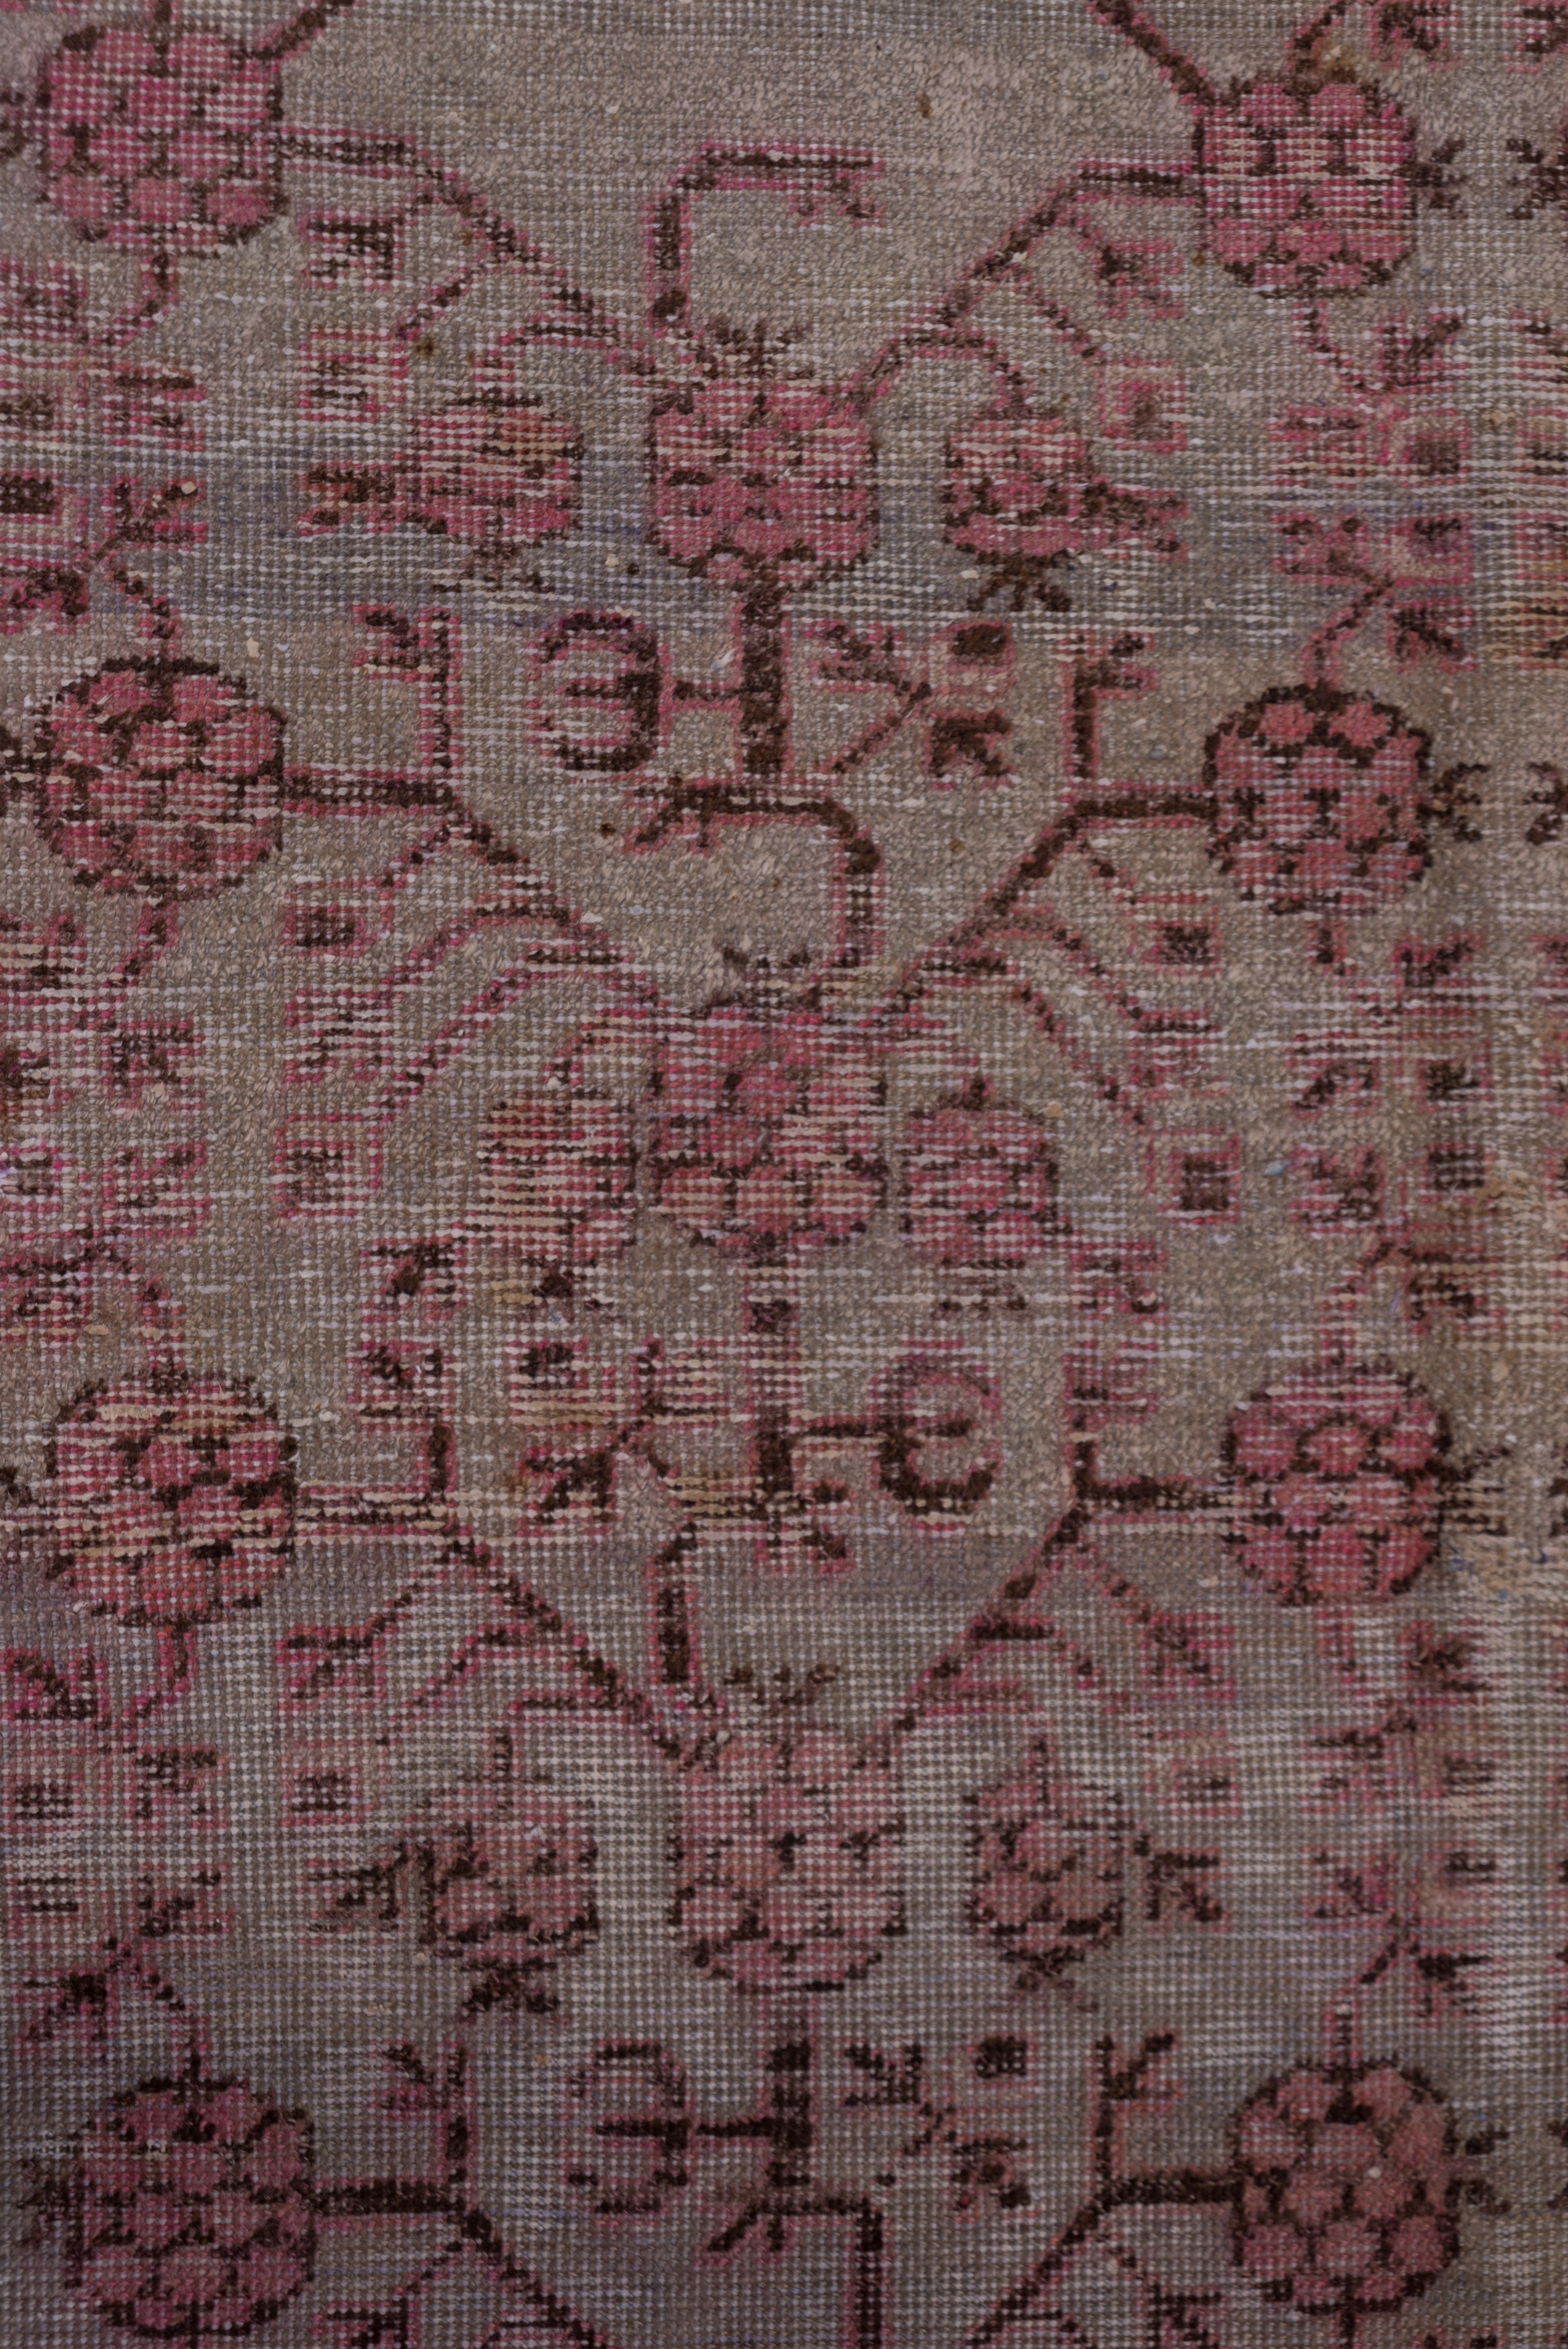 Hand-Knotted Antique Pink Khotan Rug, Gray Blue and Taupe Field, Pink and Brown Accents